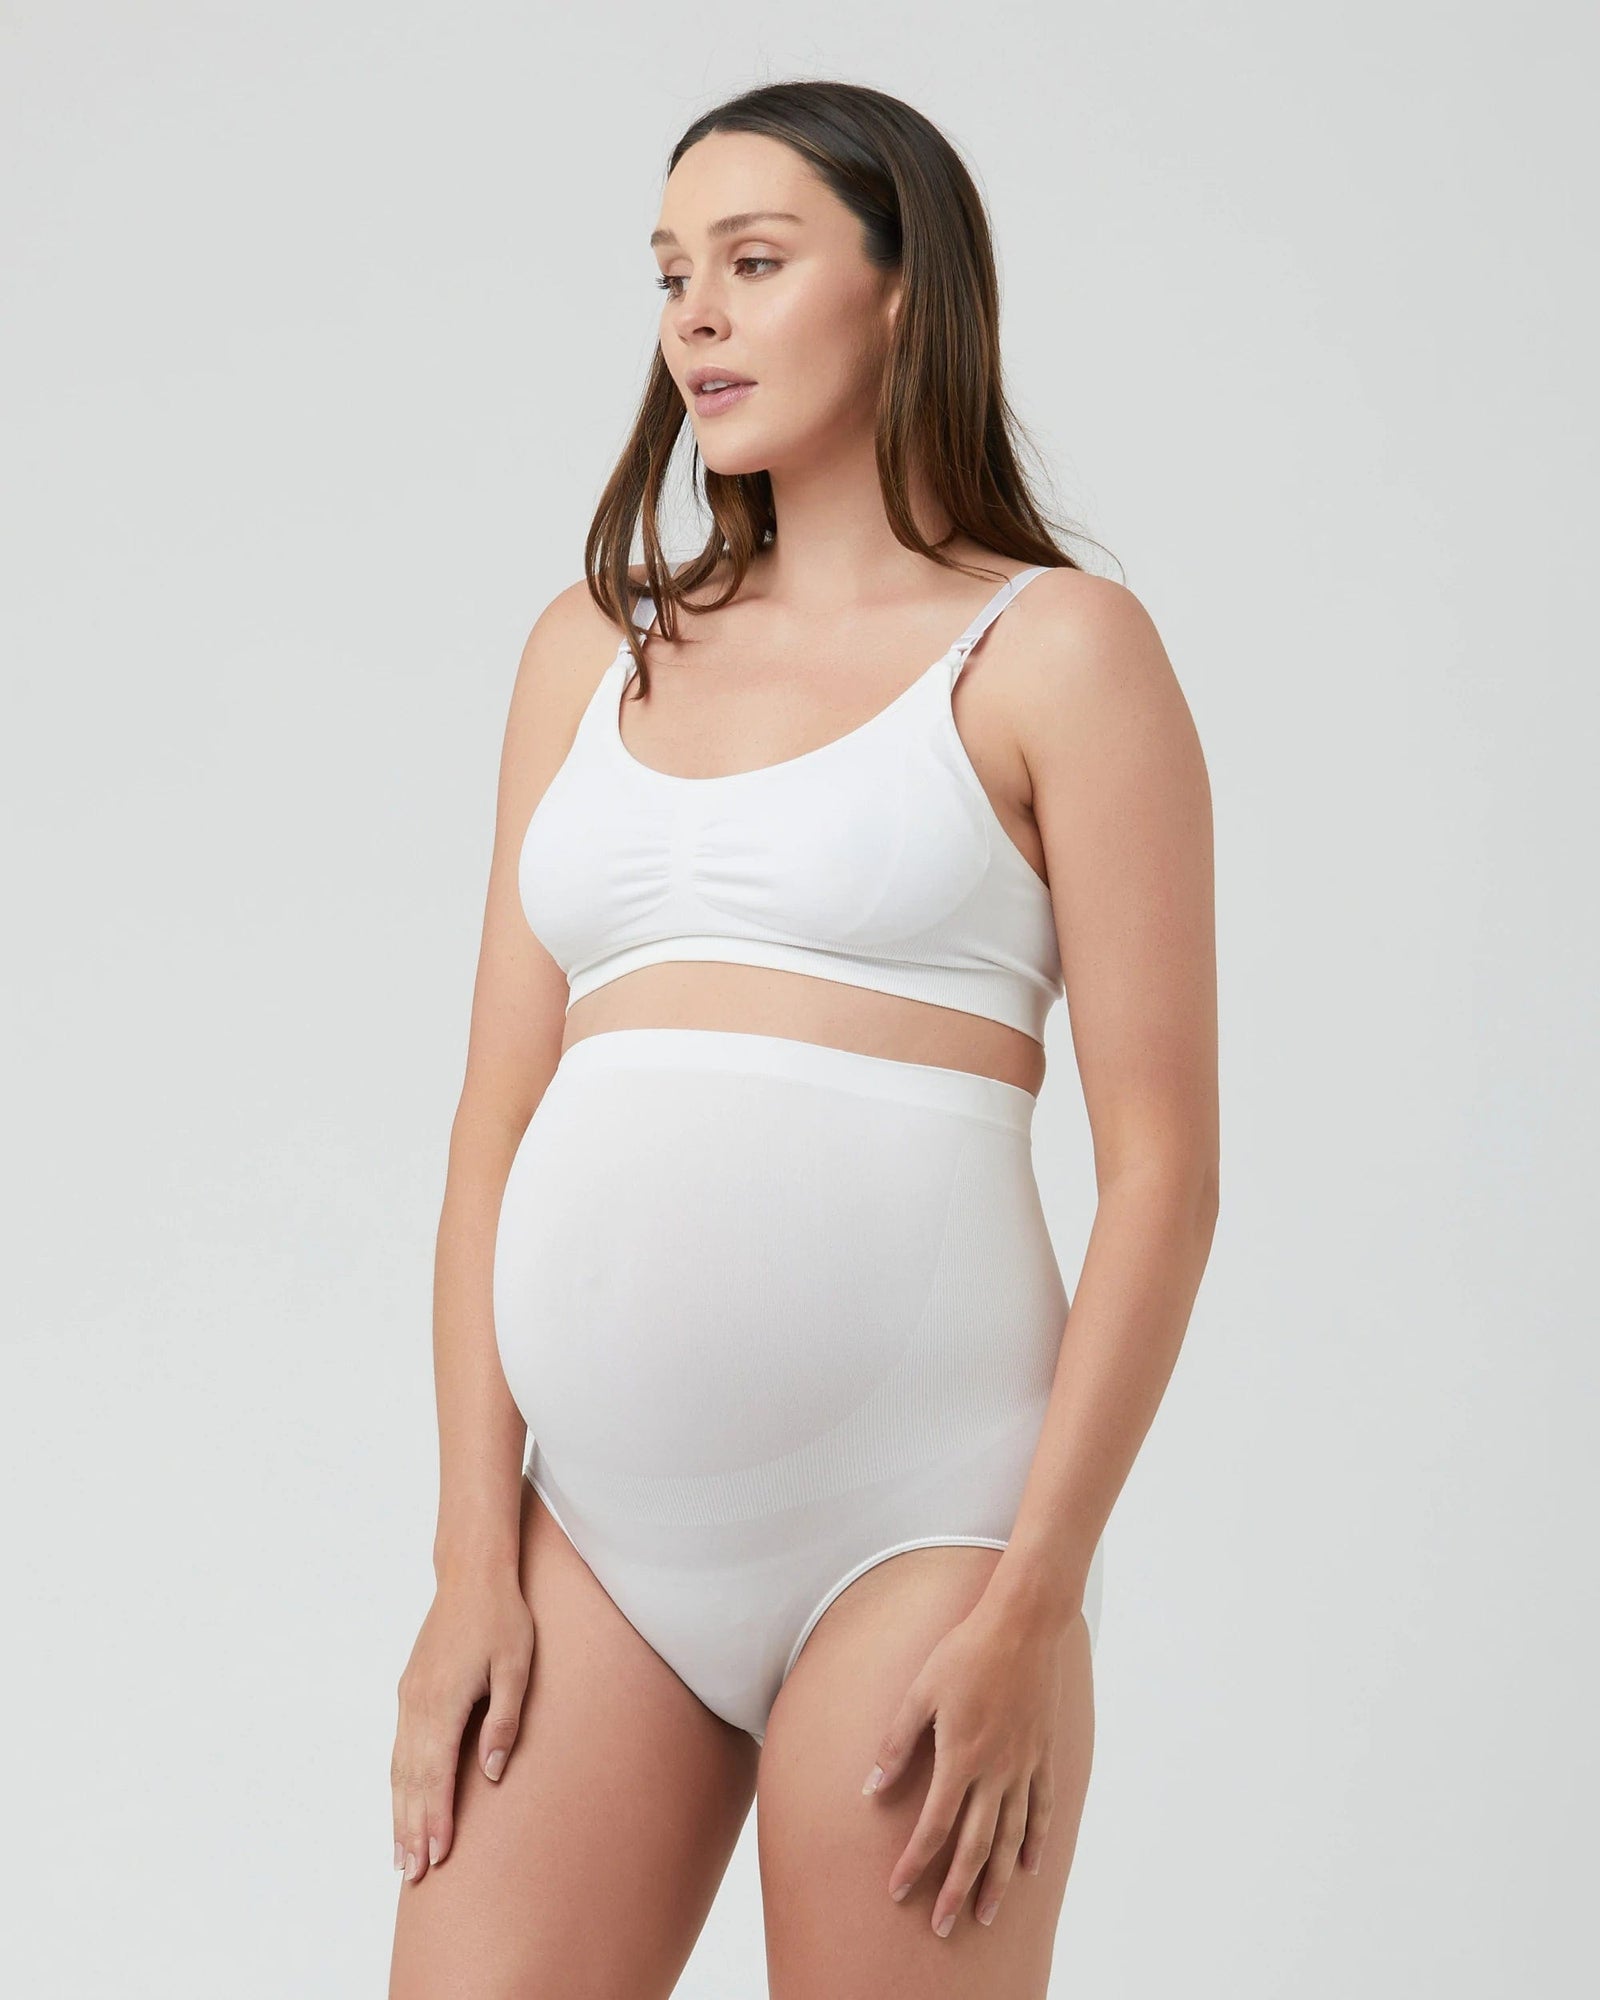 Baby's Sweet Beginnings Breastfeeding&Maternity Boutique - Looking for the  perfect nursing bra? BSB has them! WNY's largest selection of maternity and nursing  bras, tanks and tops! We now carry 8 different brands